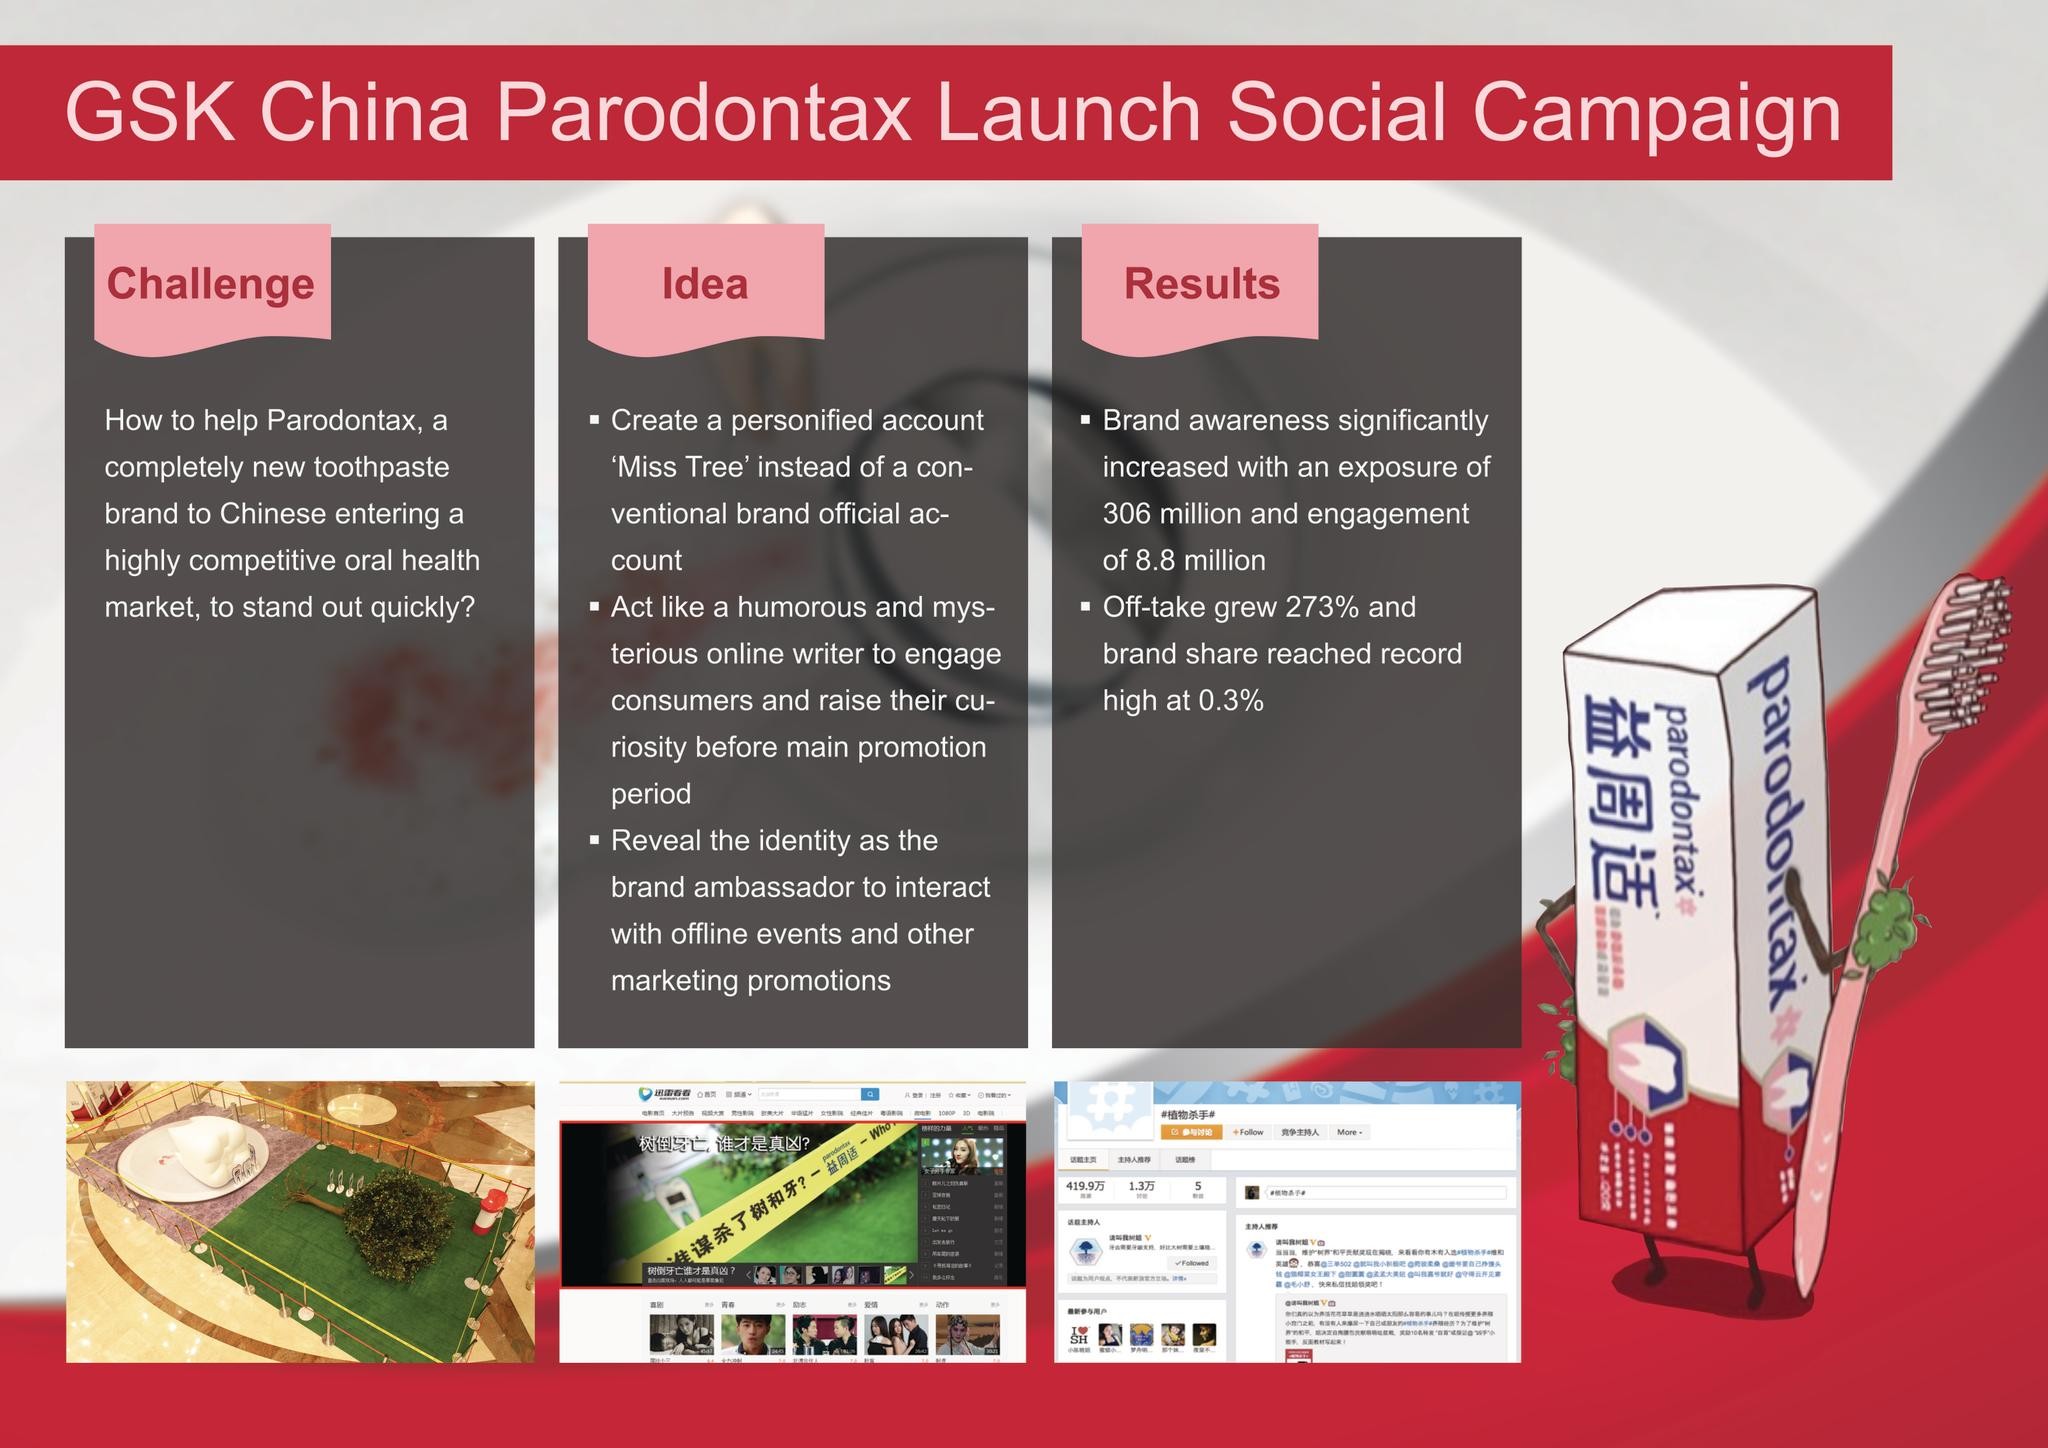 GSK CHINA PARODONTAX LAUNCH SOCIAL CAMPAIGN